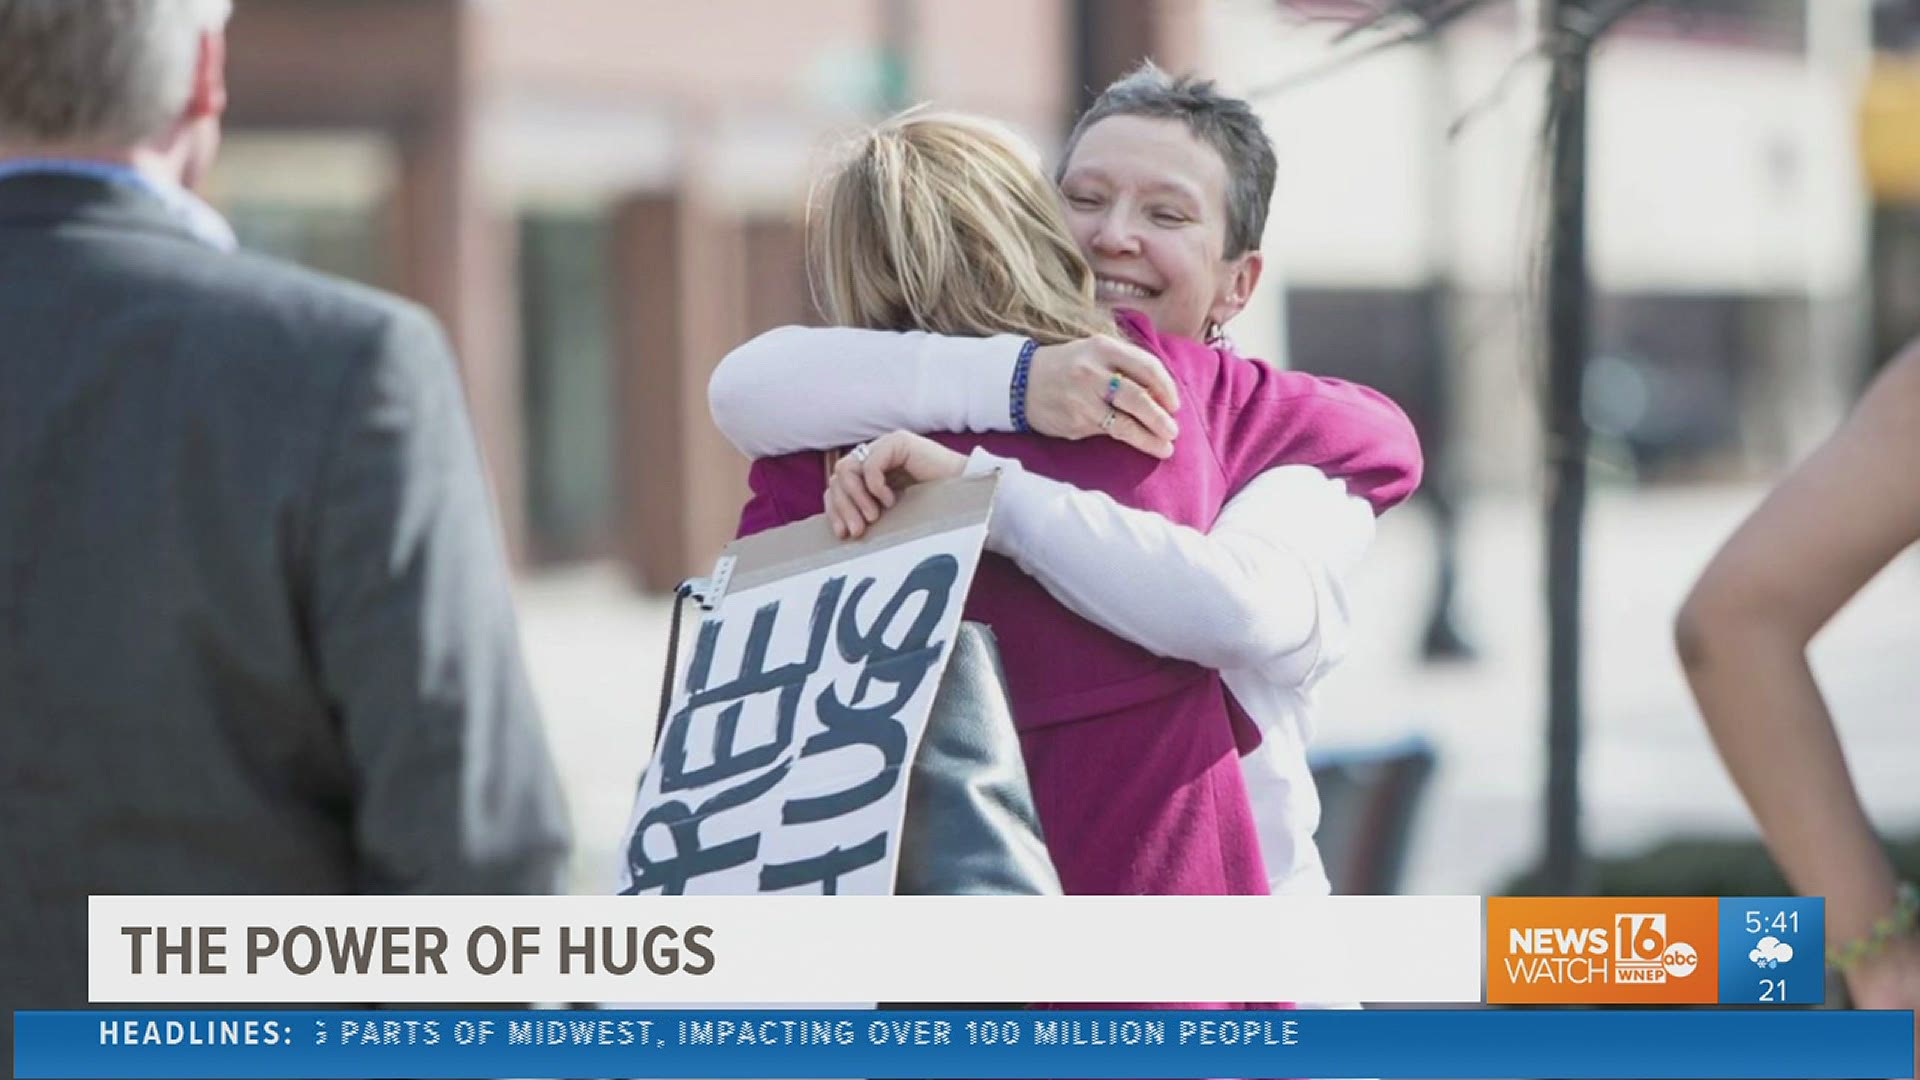 Newswatch 16's Ryan Leckey is introducing us to a woman from our area dubbed “the hug lady” who is sharing some safe and creative ways for us to feel that warmth.